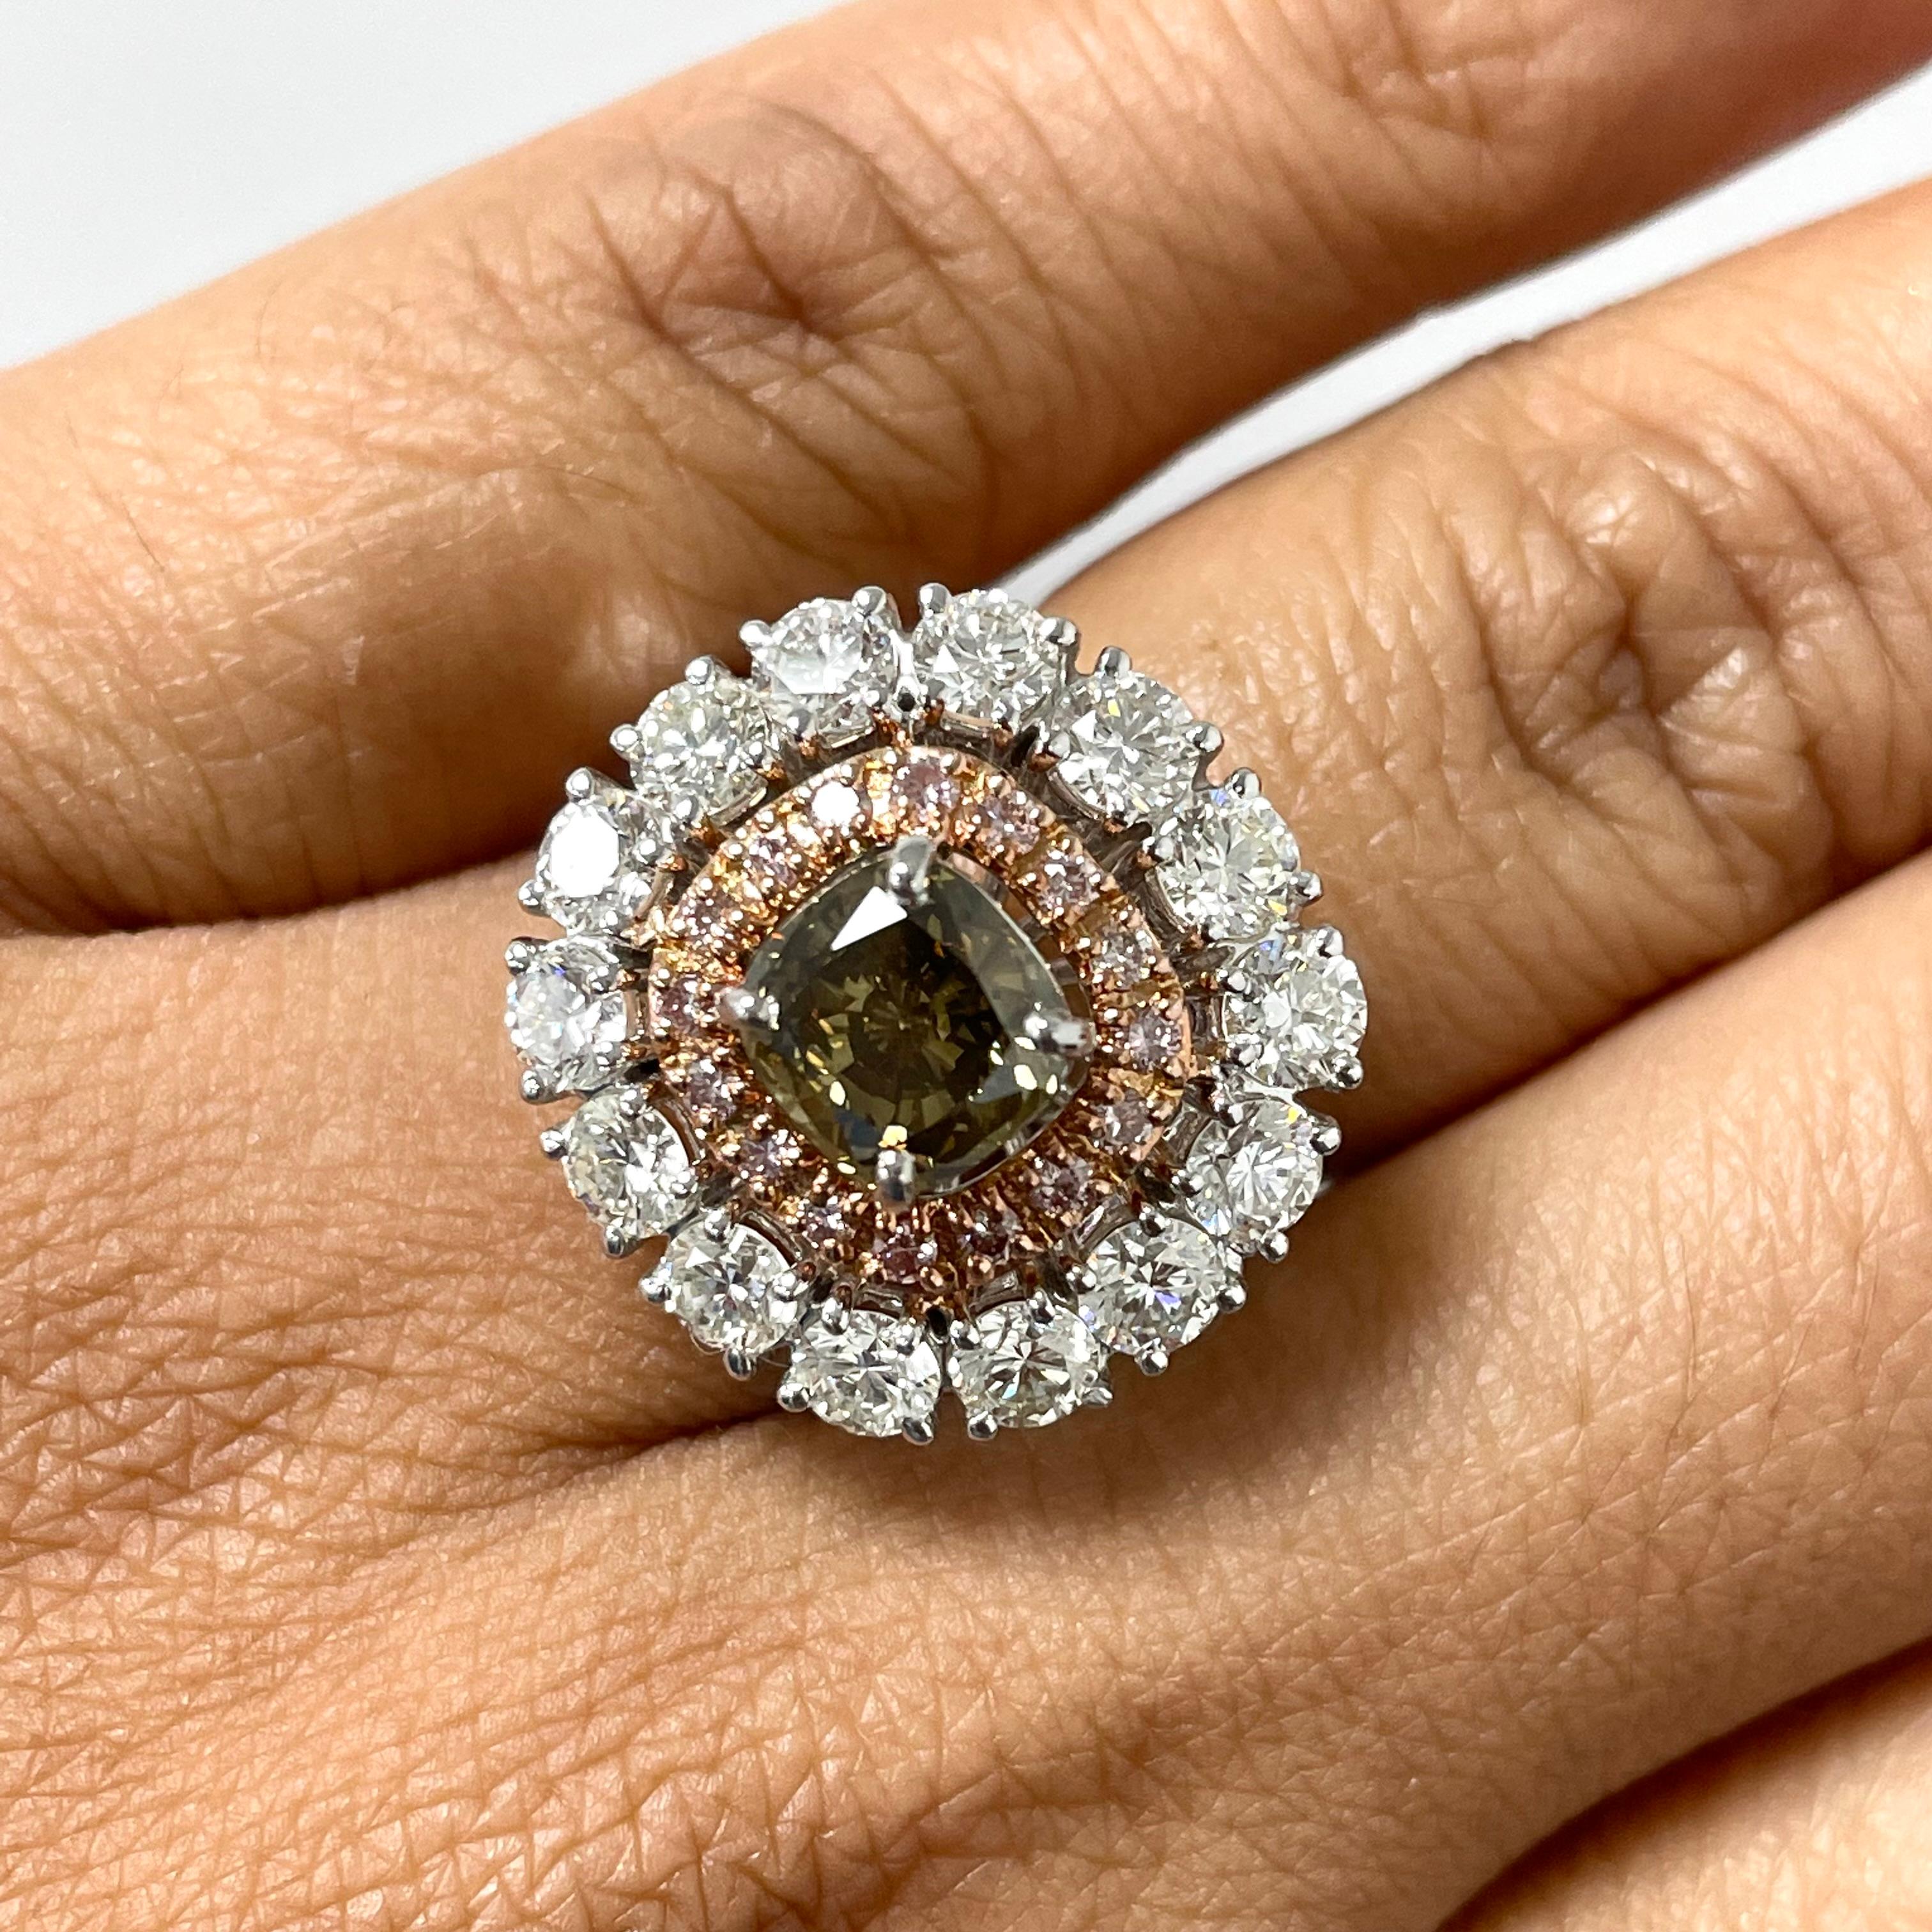 This statement ring is all the glitz and glam with is chocolate diamond center and pink diamond halo highlighted by the classic beauty of white diamonds.

Center Diamond Shape: Cushion
Center Diamond Weight: 1.51 ct 
Diamond Color: Brown
Diamond